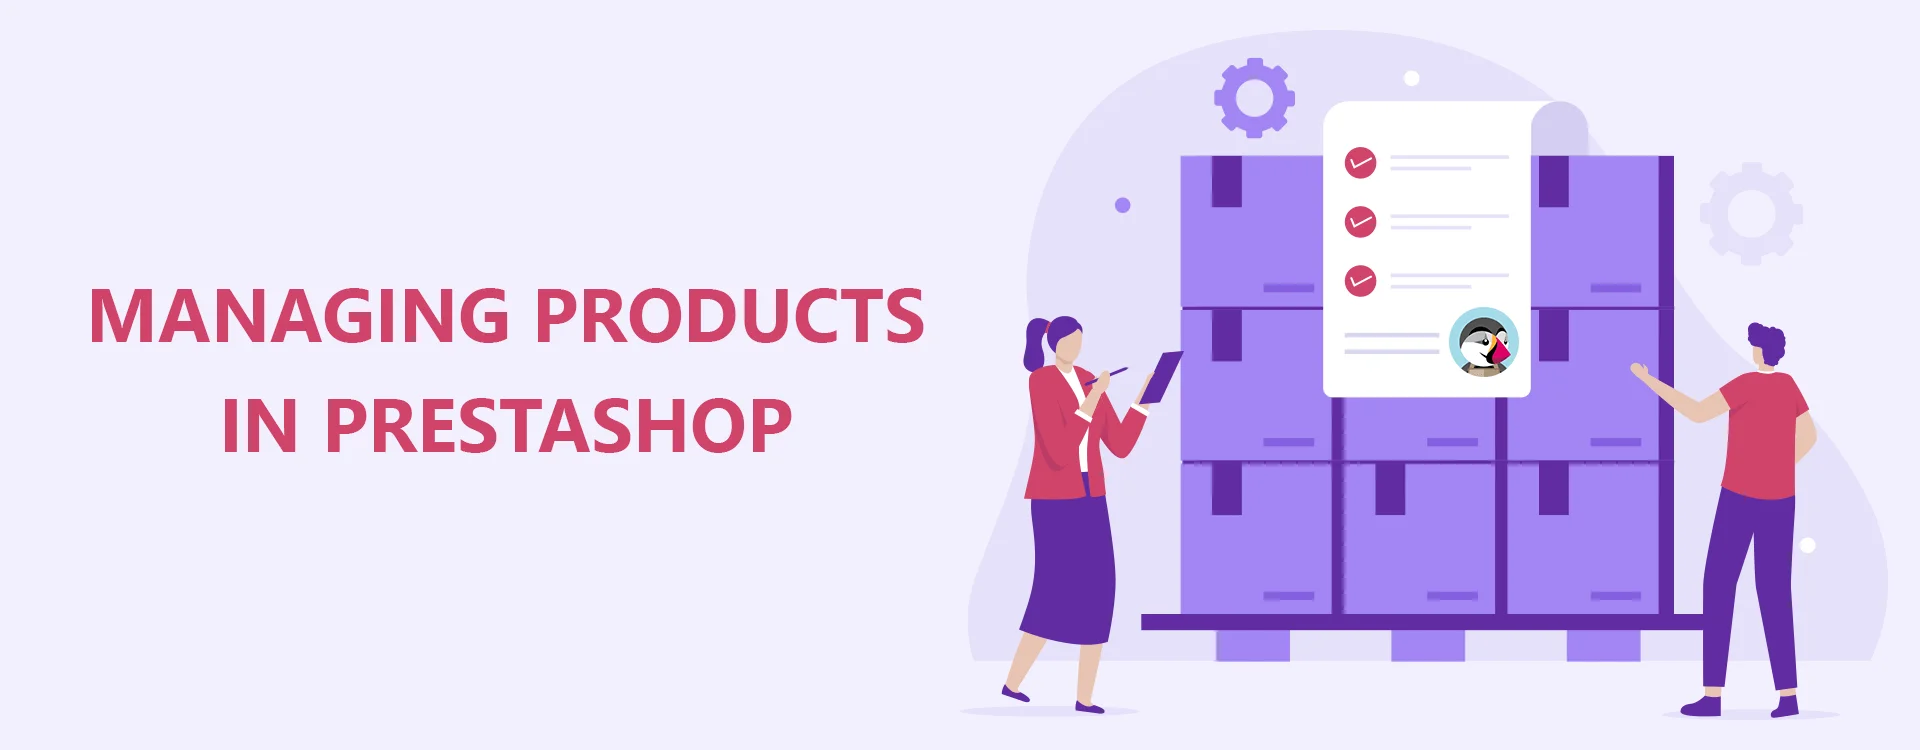 How to manage products in PrestaShop effectively?